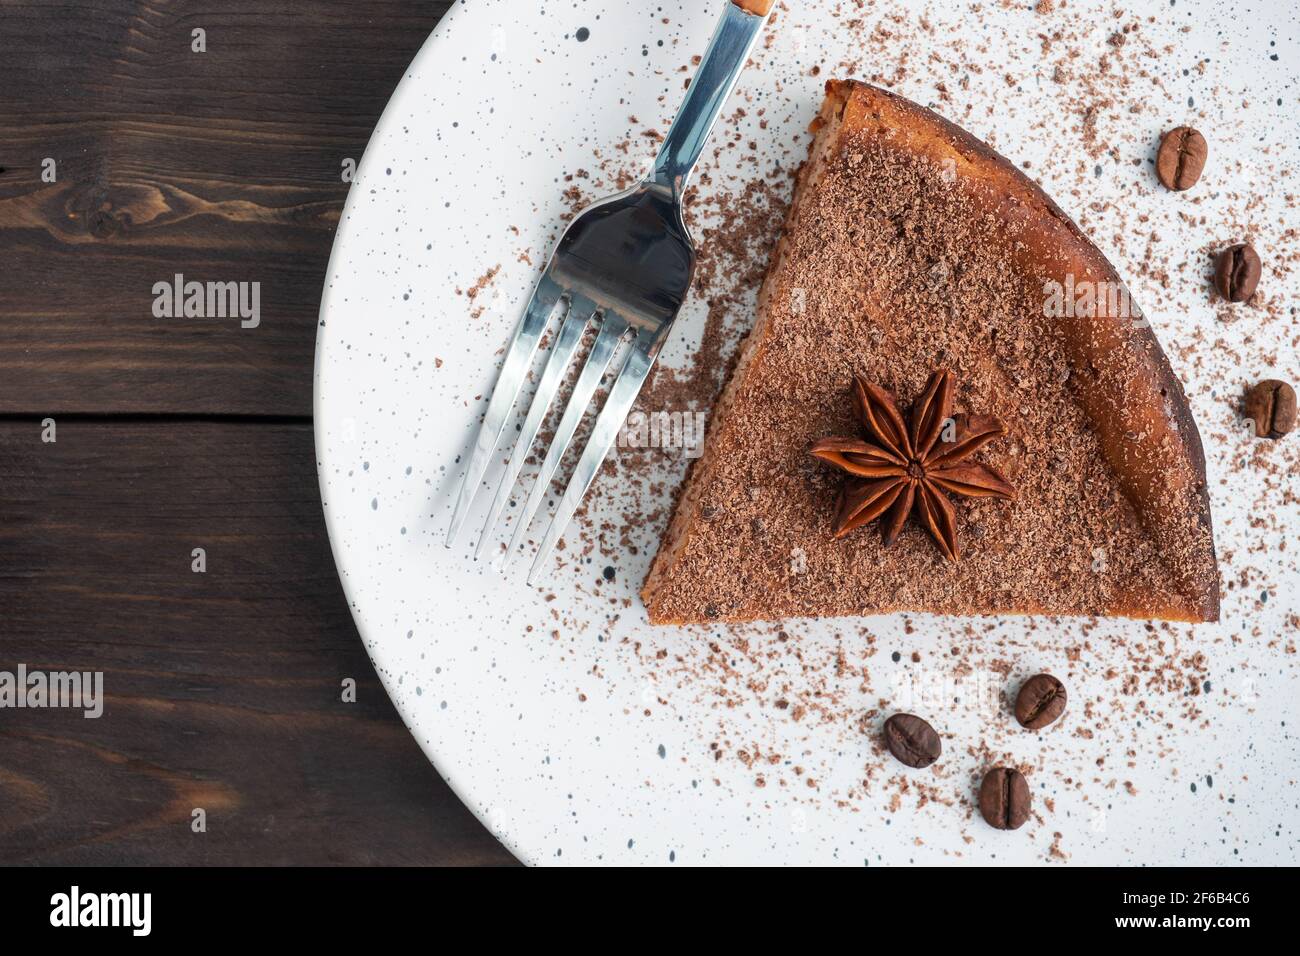 Slice of chocolate curd casserole on a plate, a portion piece of cake with chocolate and coffee. Dark wooden rustic background top view, copy space Stock Photo